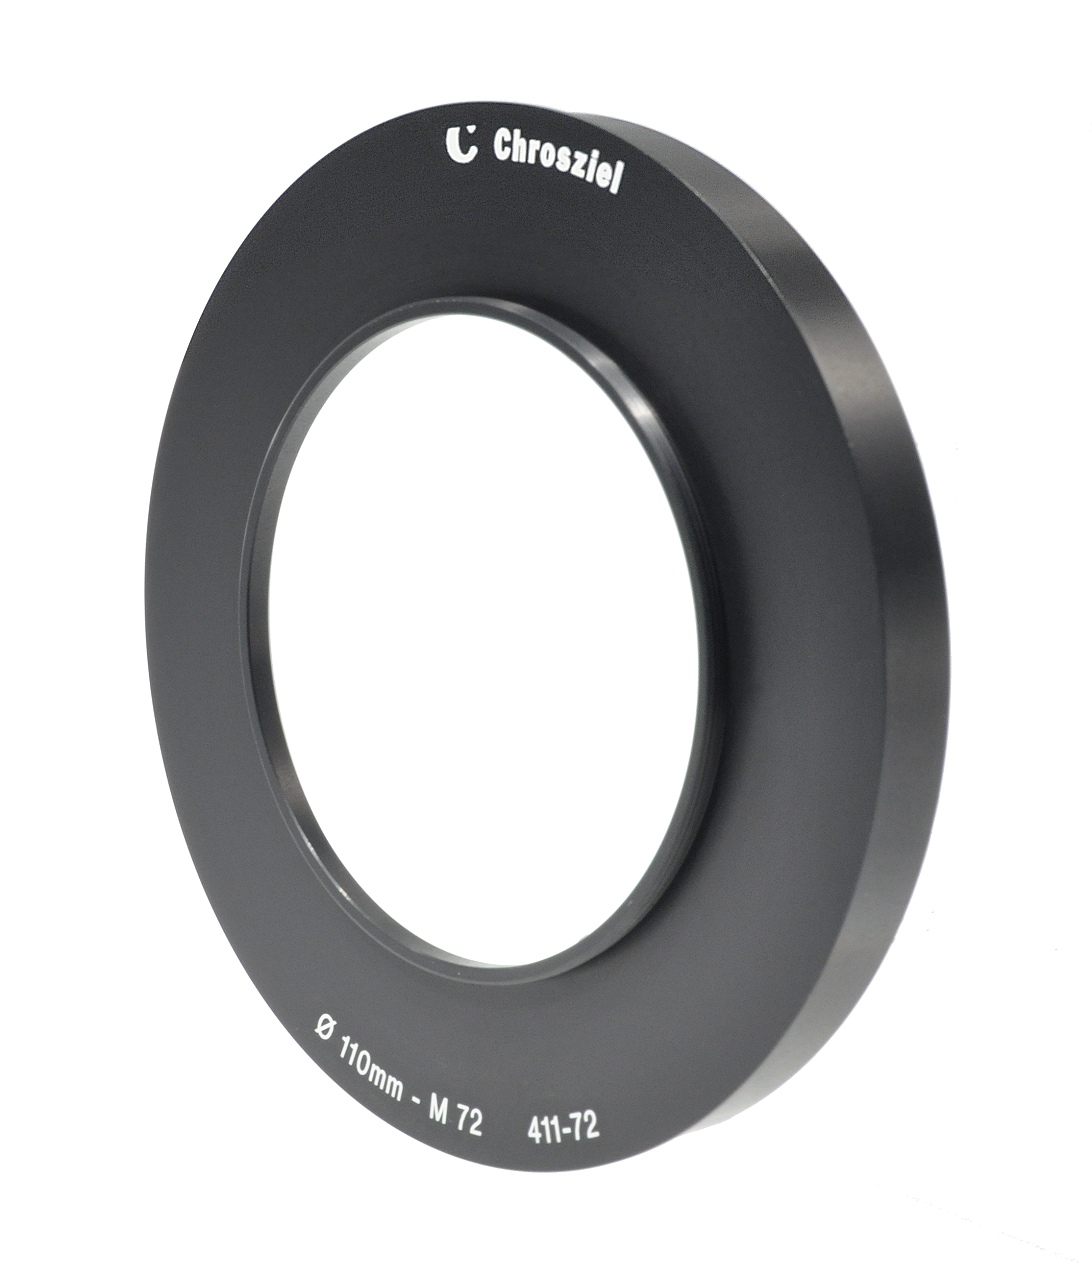 Adapter Ring Ø110:M72 mm for MB456, MB450 matteboxes